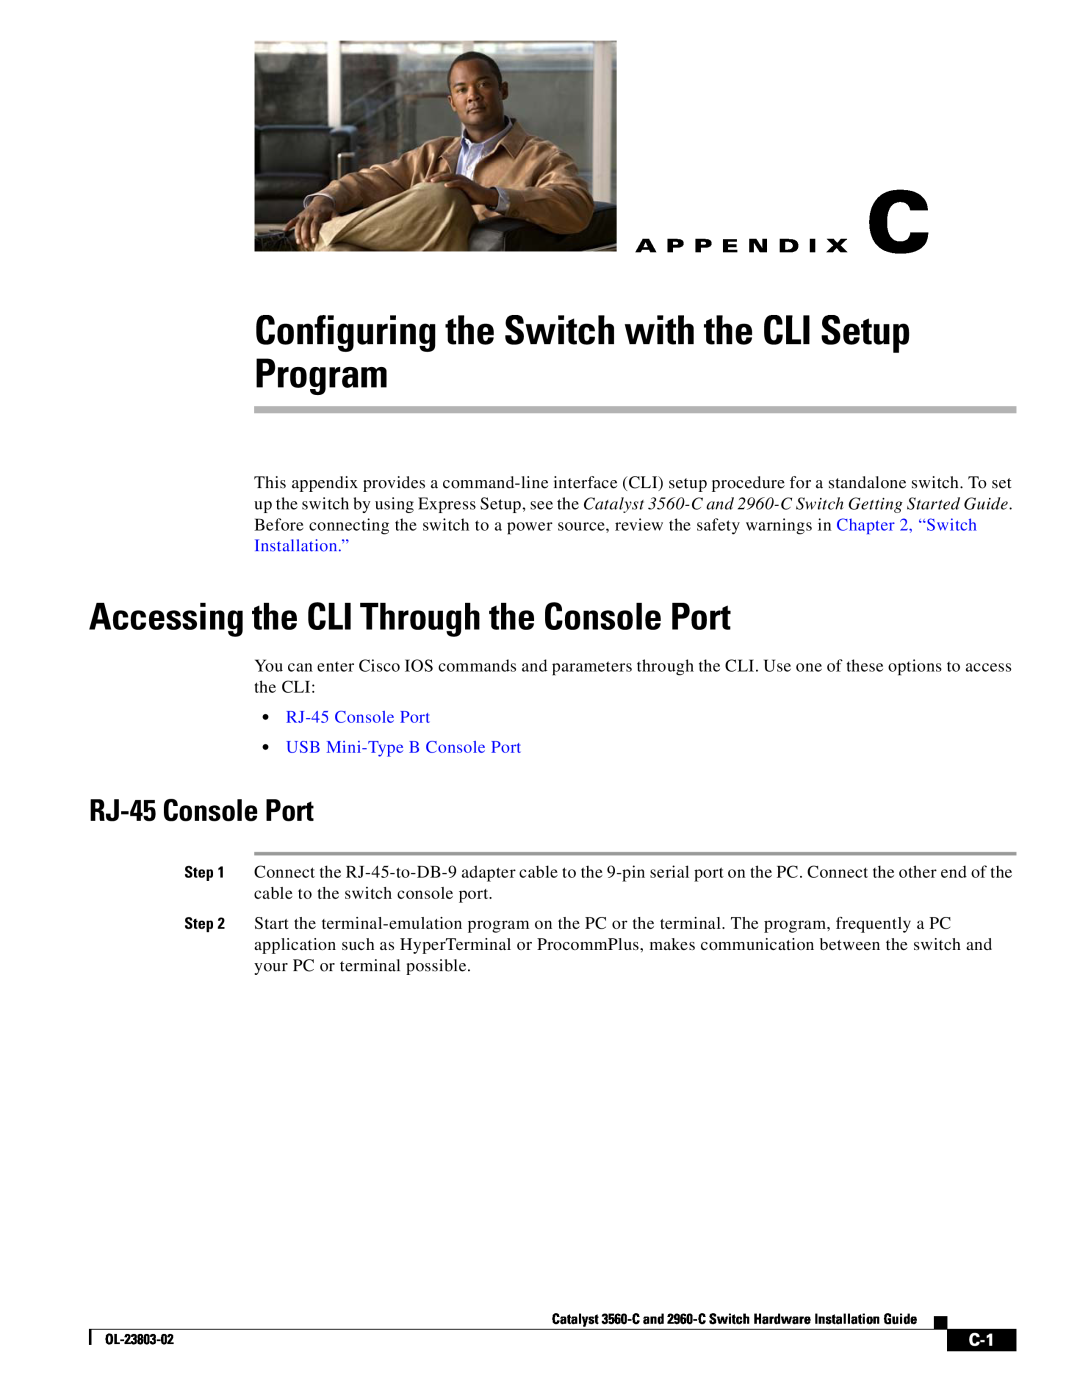 Cisco Systems 3560-C manual Configuring the Switch with the CLI Setup Program, Accessing the CLI Through the Console Port 